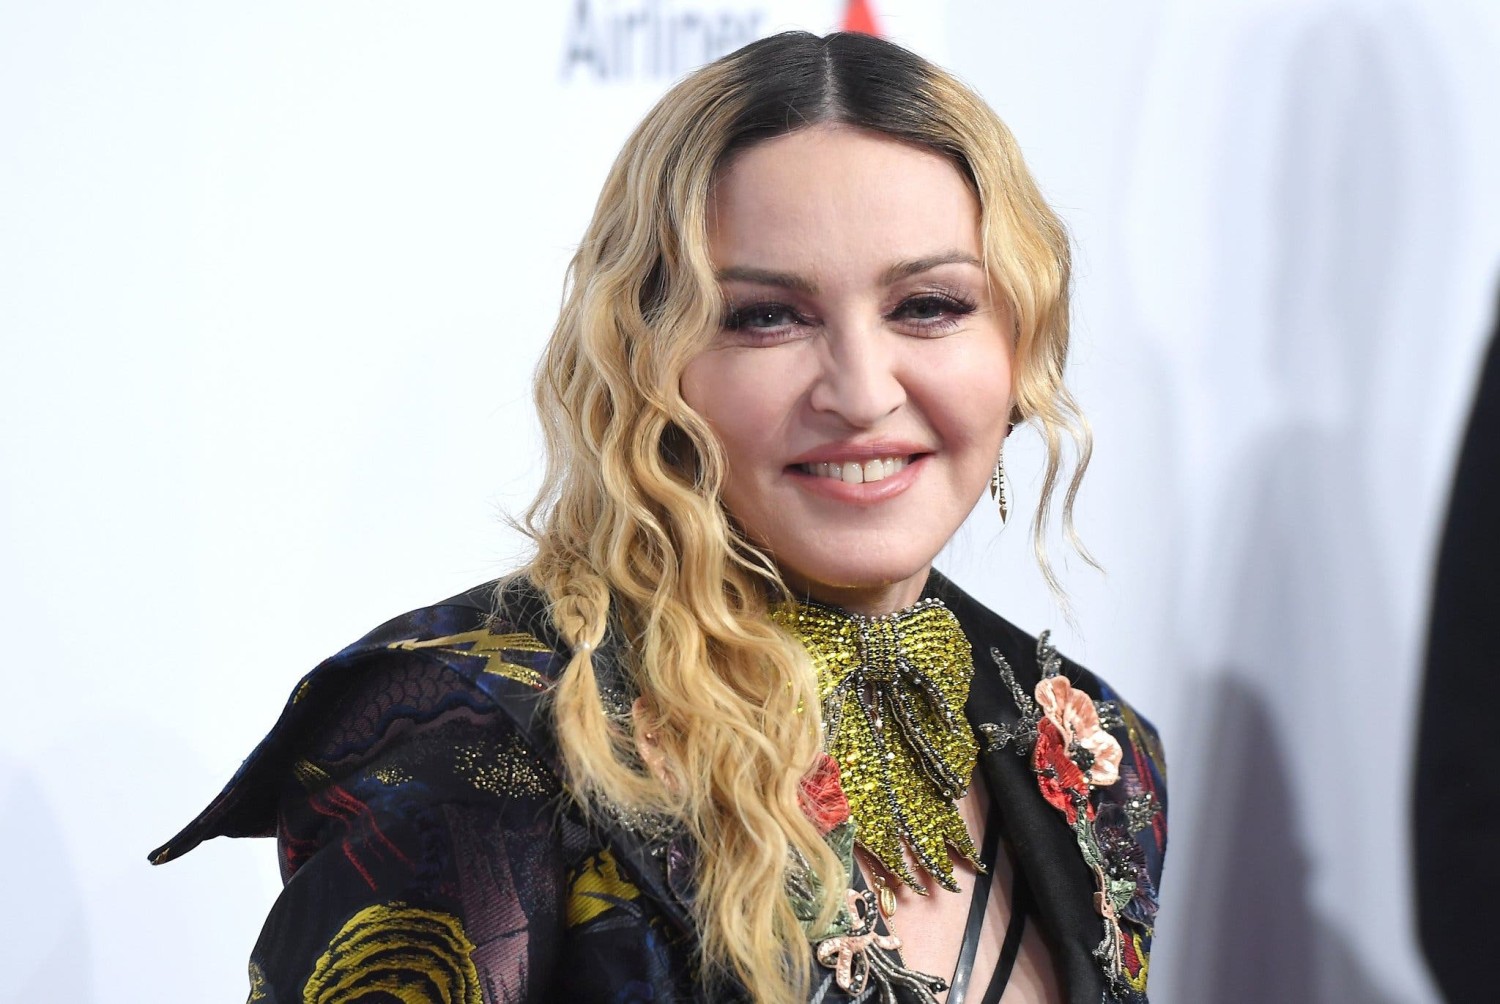 Madonna had sought to block the sale of memorabilia items that she described as “extremely private and personally sensitive.”Credit...Angela Weiss/Agence France-Presse — Getty Images